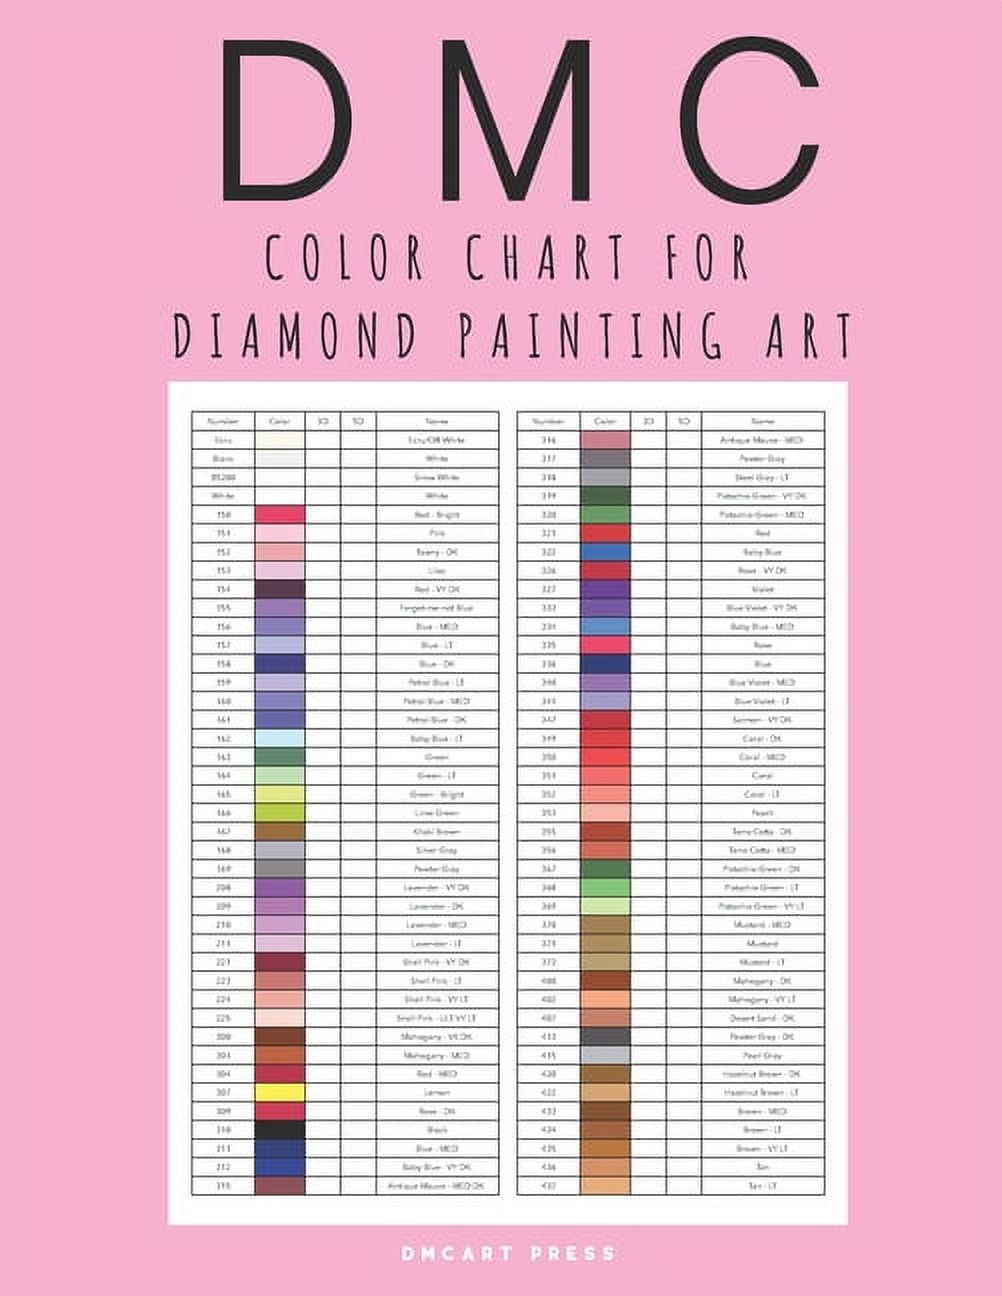 Official Diamond Painting Workbook - Log Book With DMC Color